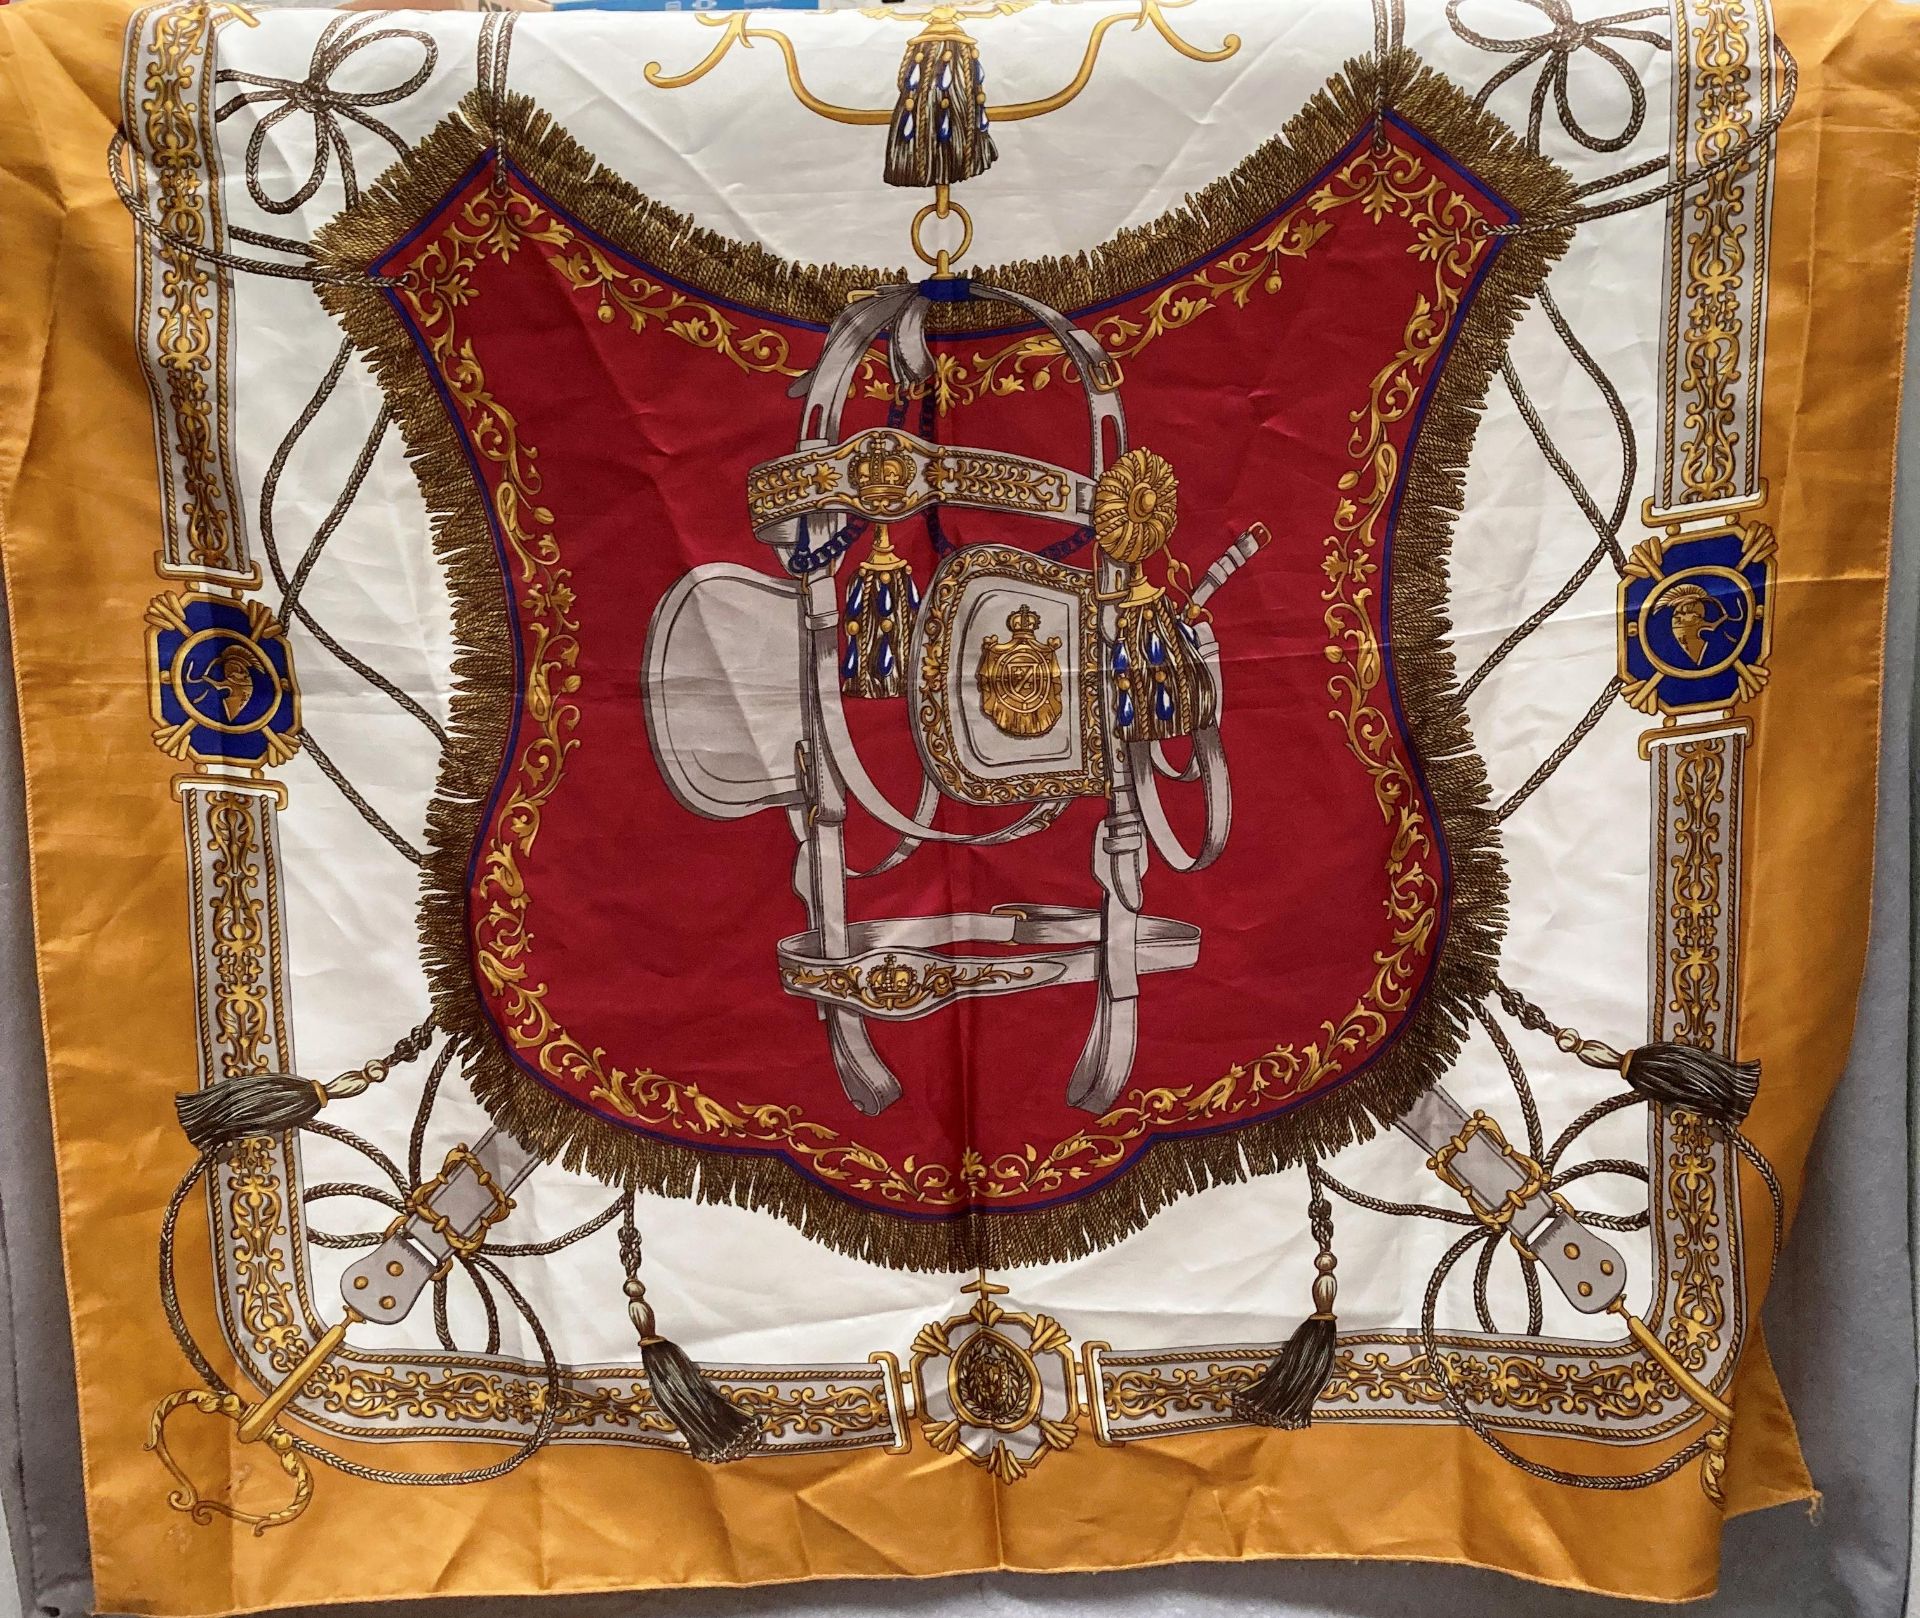 Five heraldic design etc. silk scarves by Matinto, etc. - Image 3 of 7